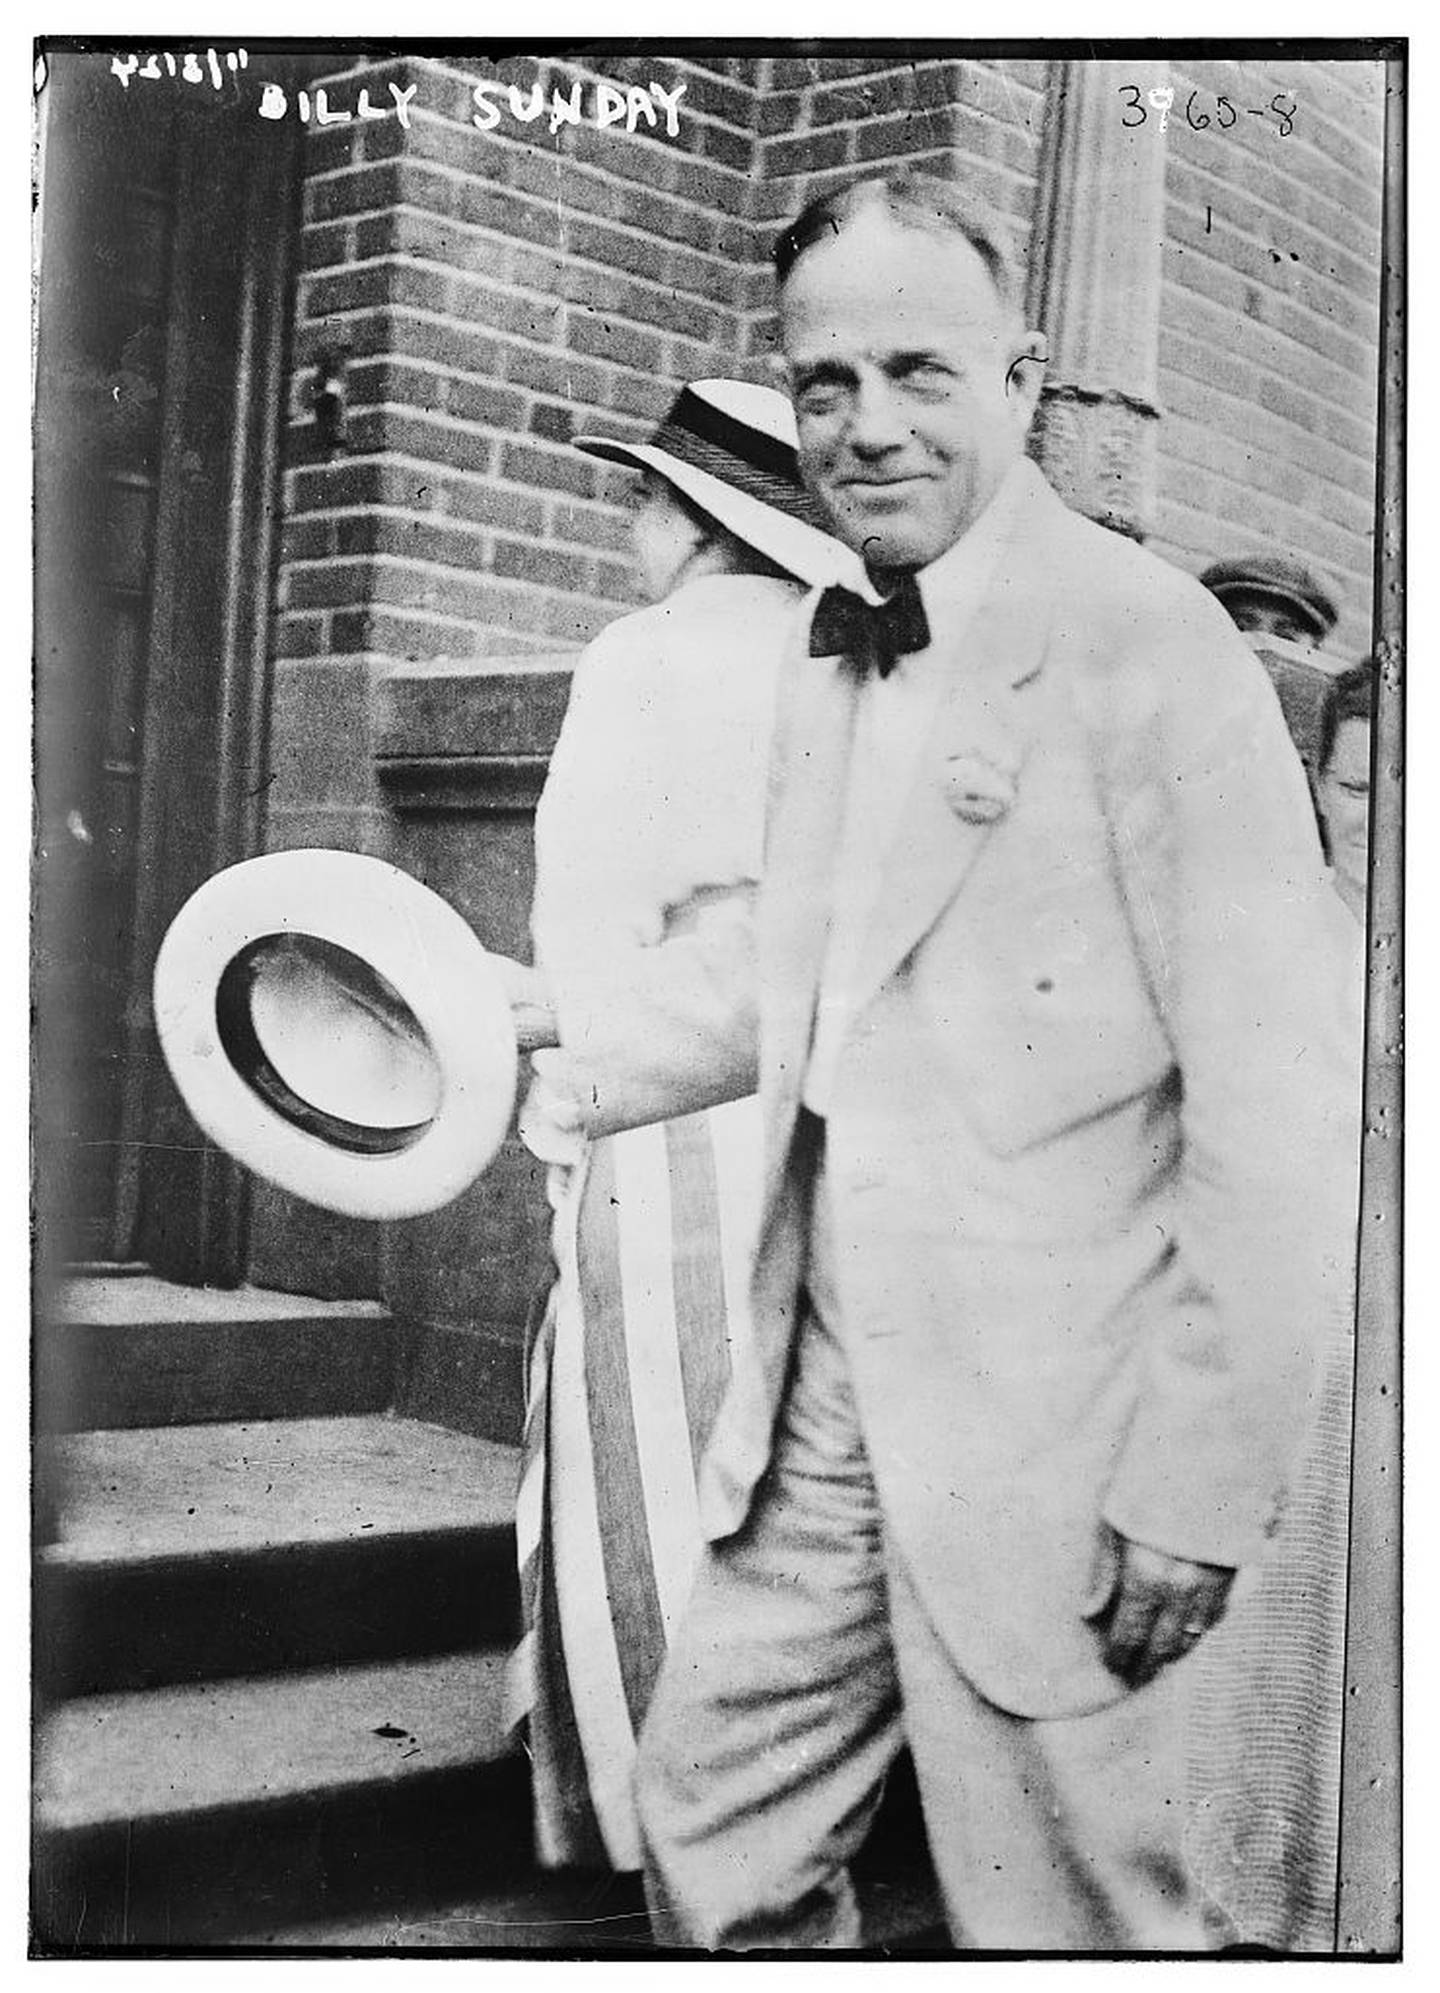 Billy Sunday, evangelist, from George Grantham Bain Collection (Library of Congress).